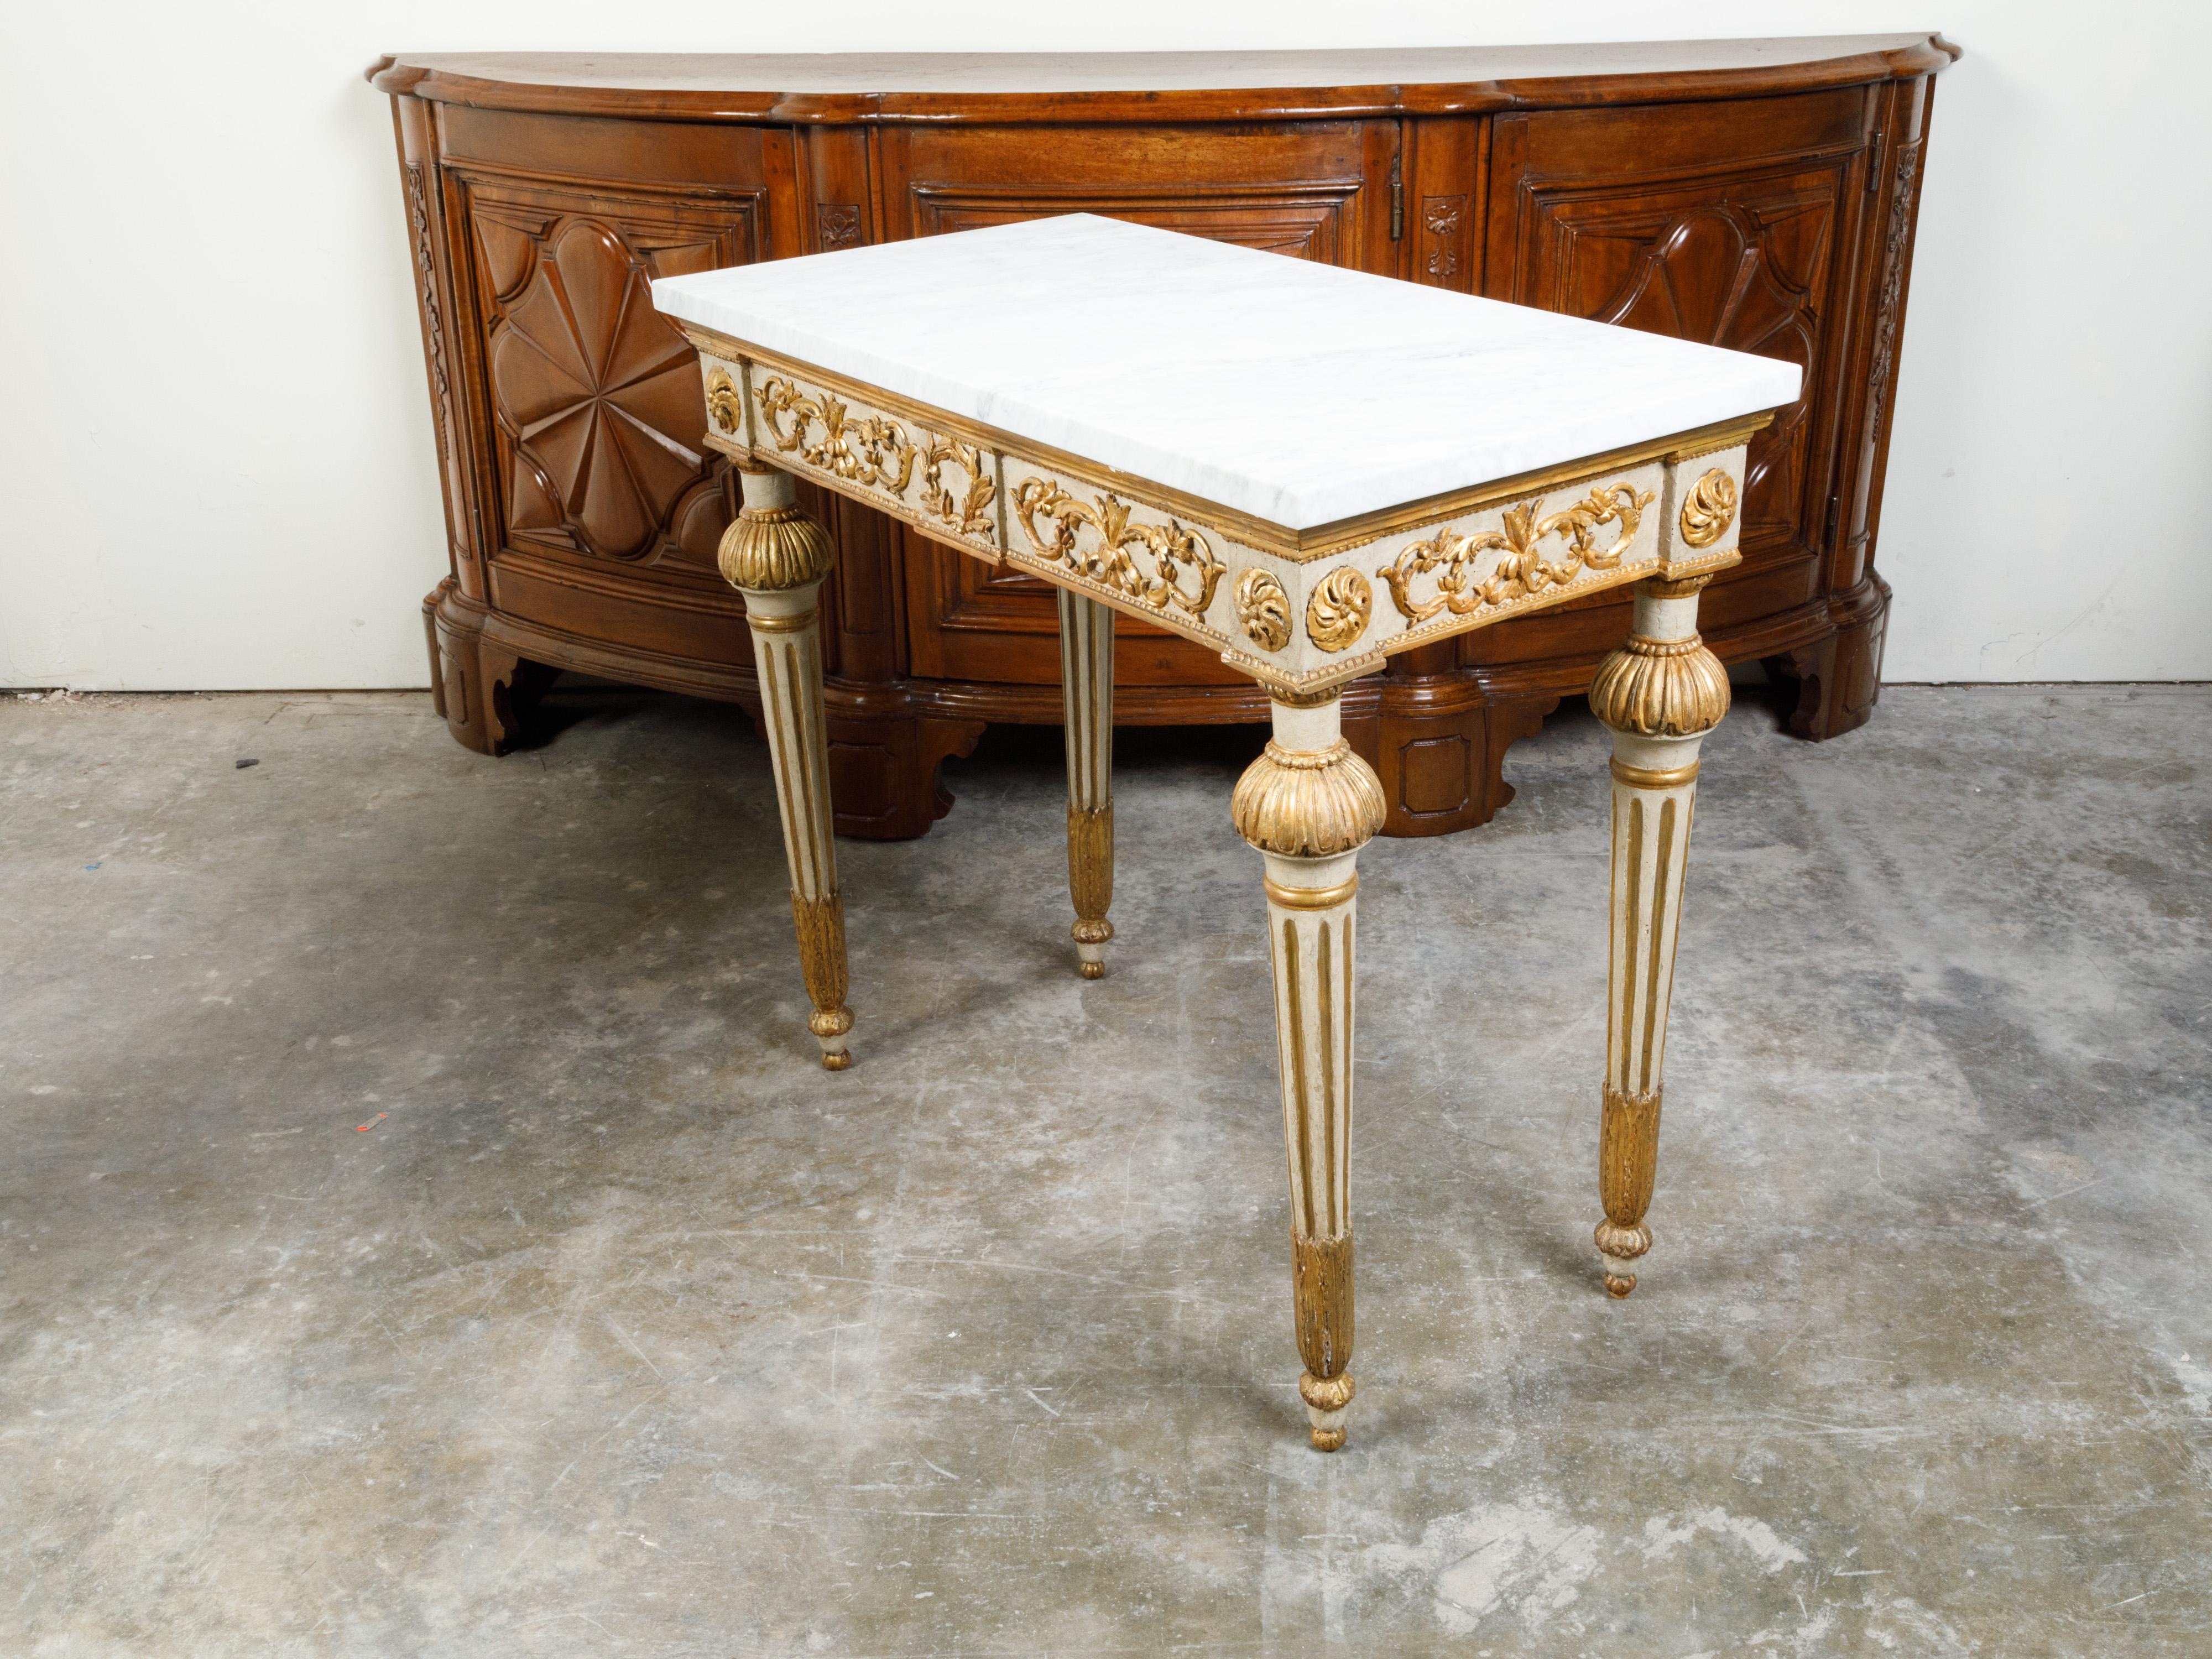 Italian 18th Century Neoclassical Carved and Gilt Console Table with Marble Top For Sale 8